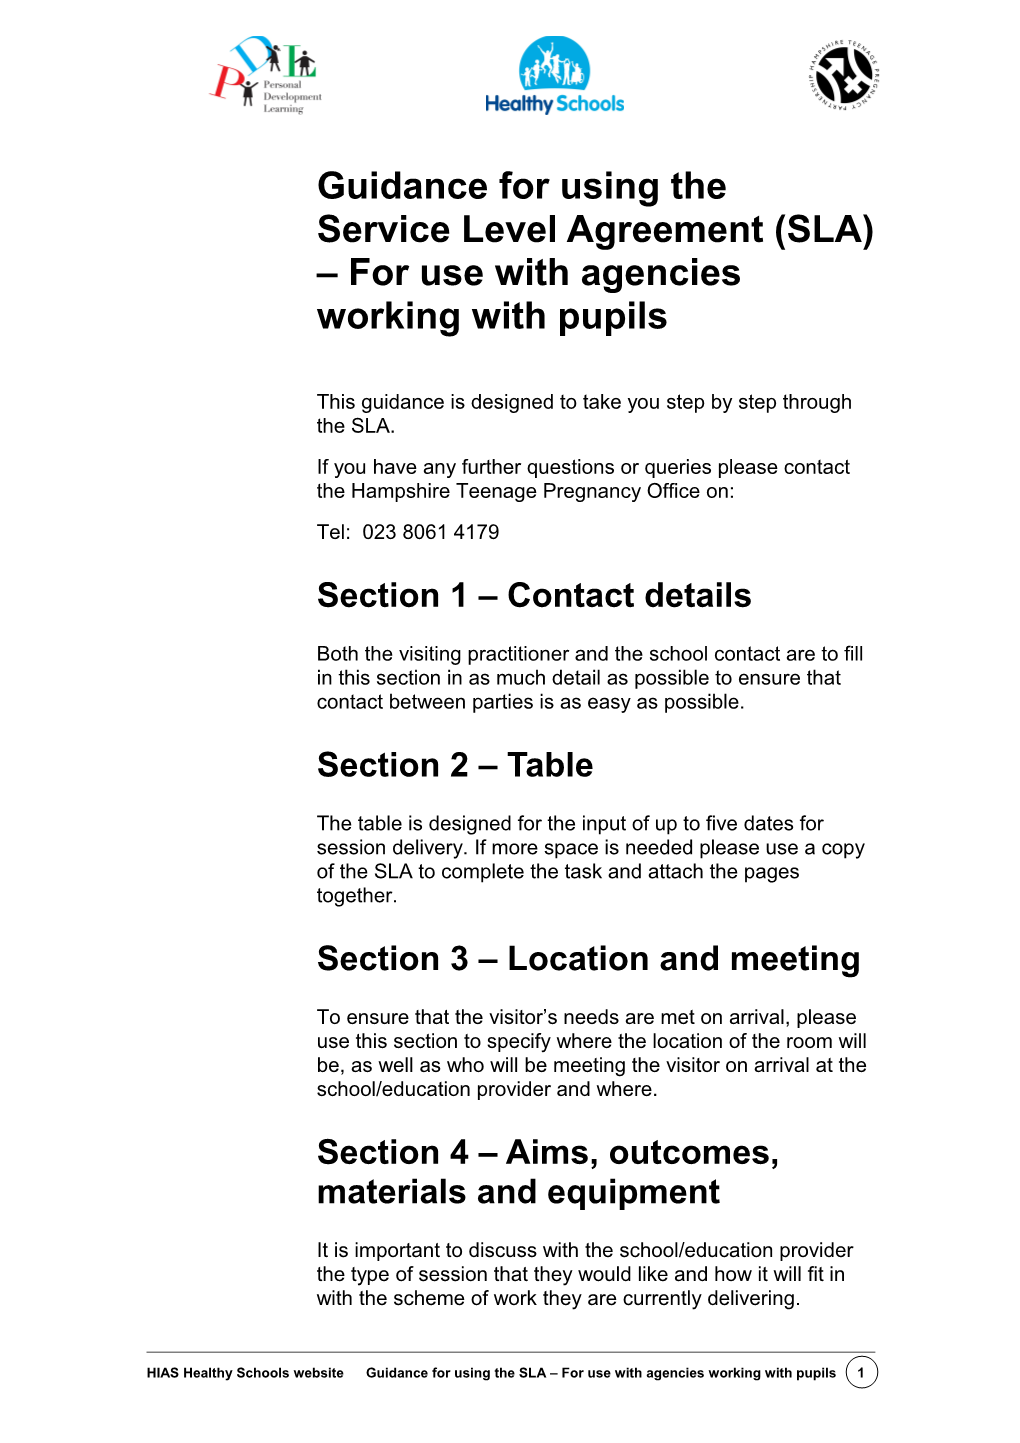 Guidance for Using the Service Level Agreement (SLA) for Use with Agencies Working with Pupils